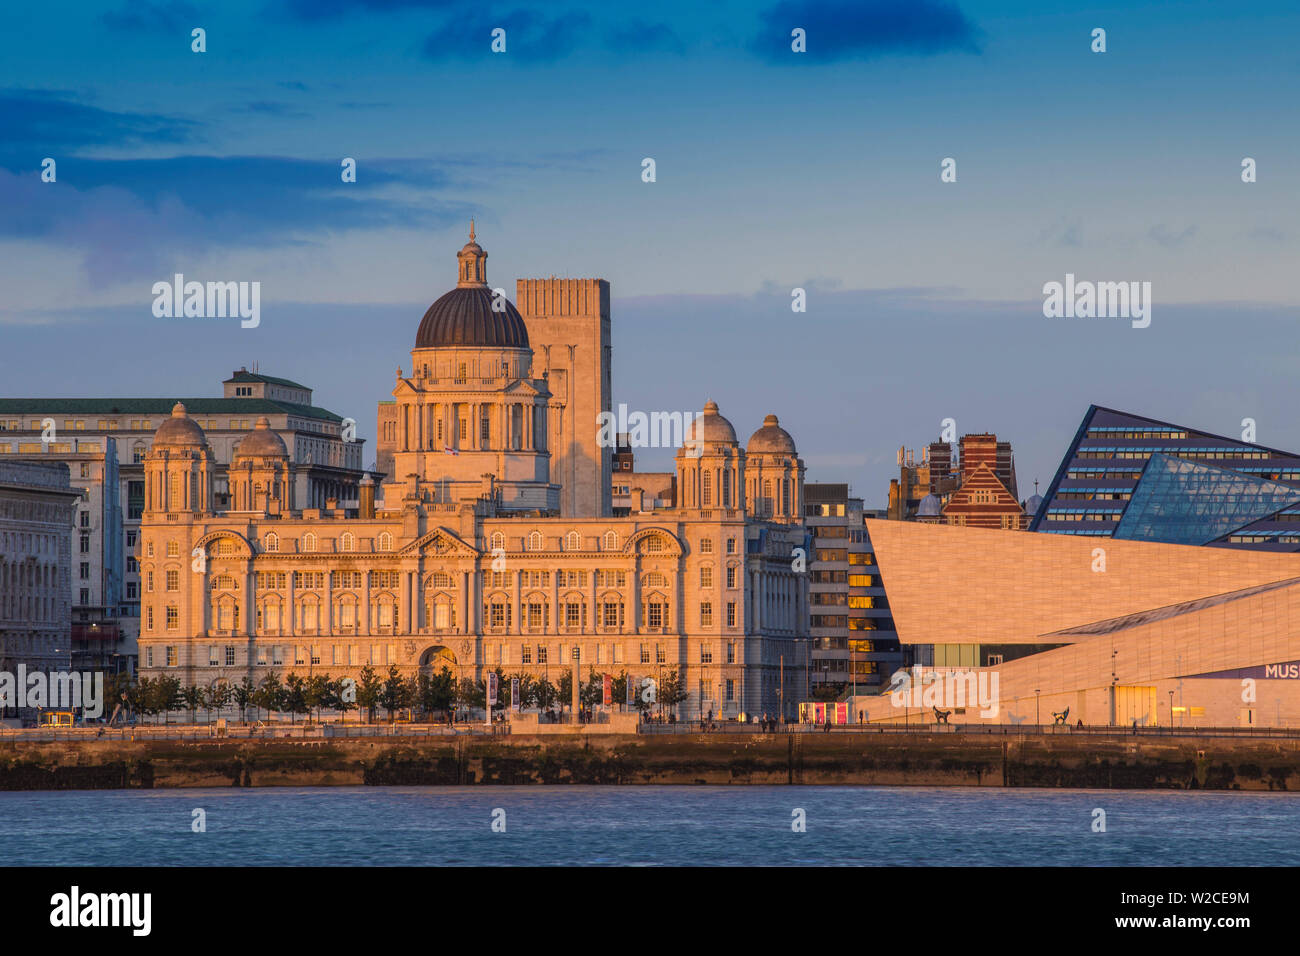 United Kingdom, England, Merseyside, Liverpool, View of The Port of Liverpool Building and the Museum of Liverpool Stock Photo